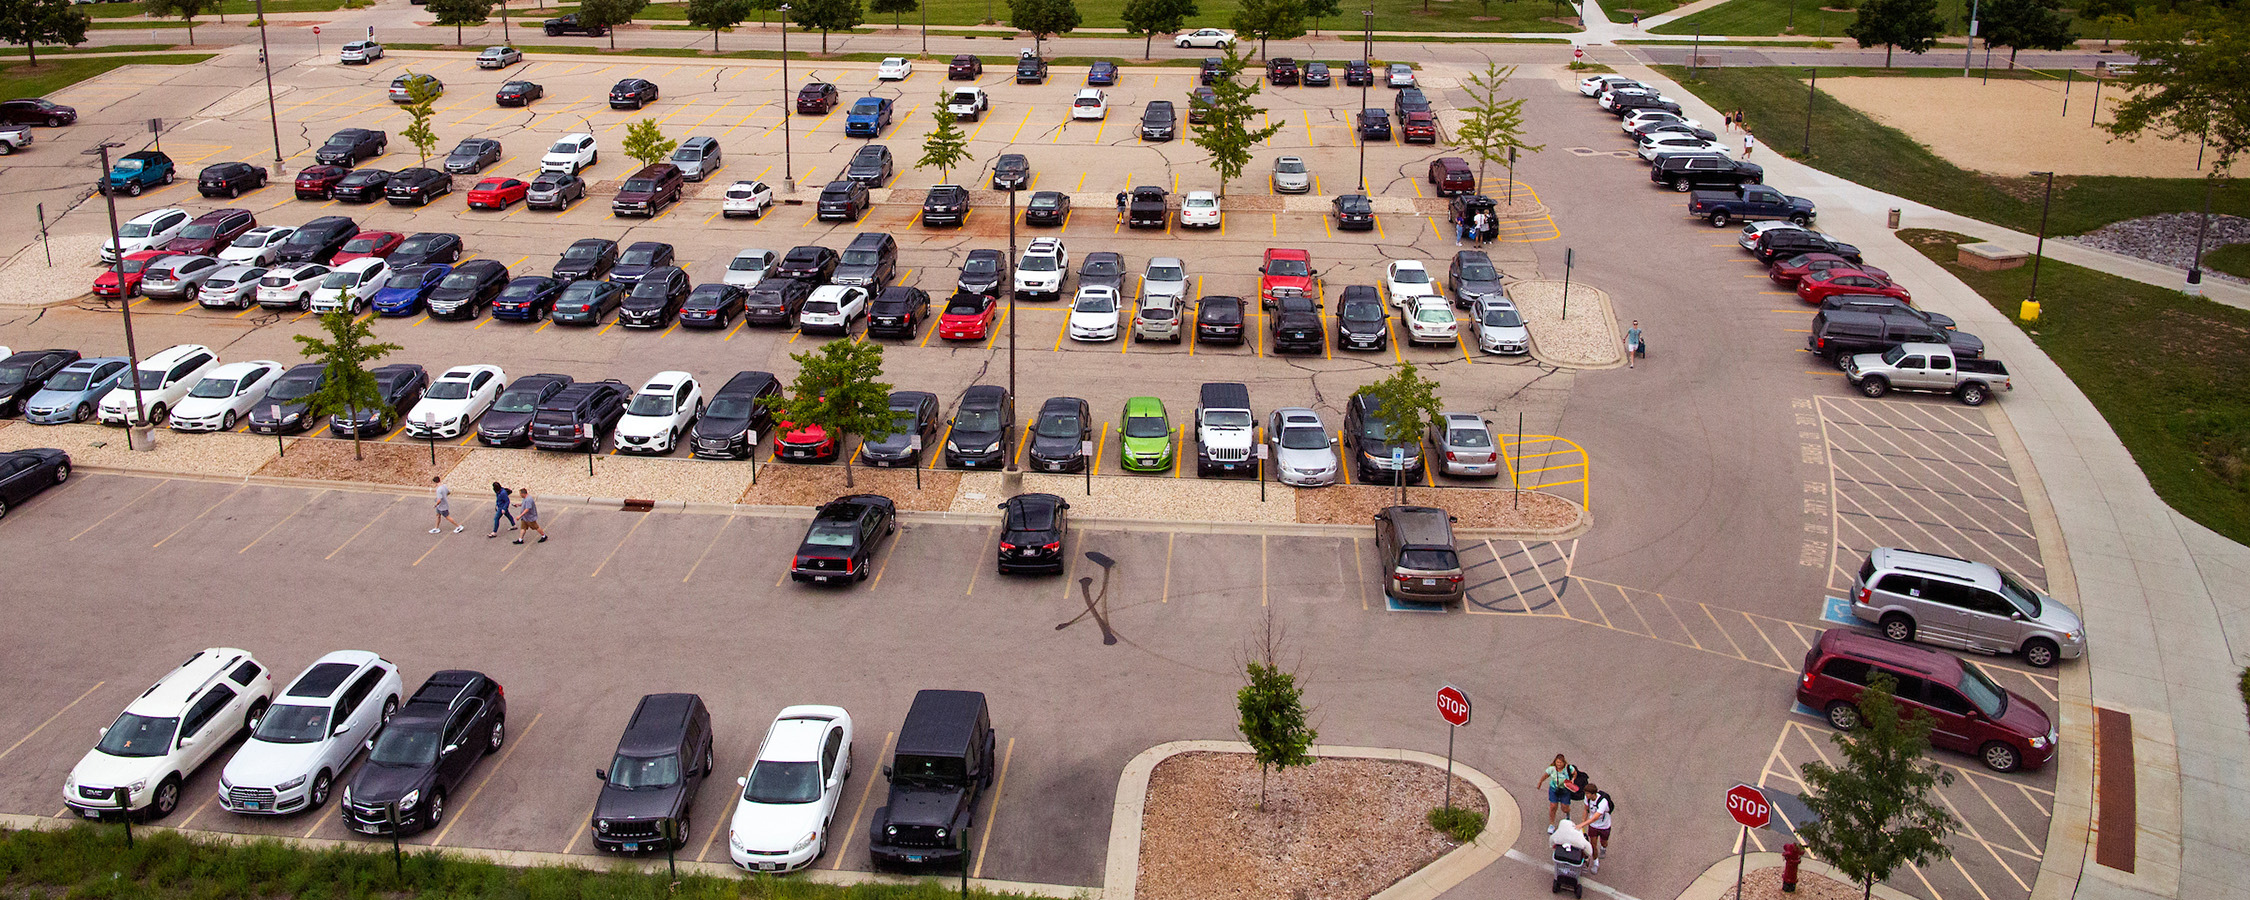 Aerial photo of a parking lot with many cars parked in spaces.